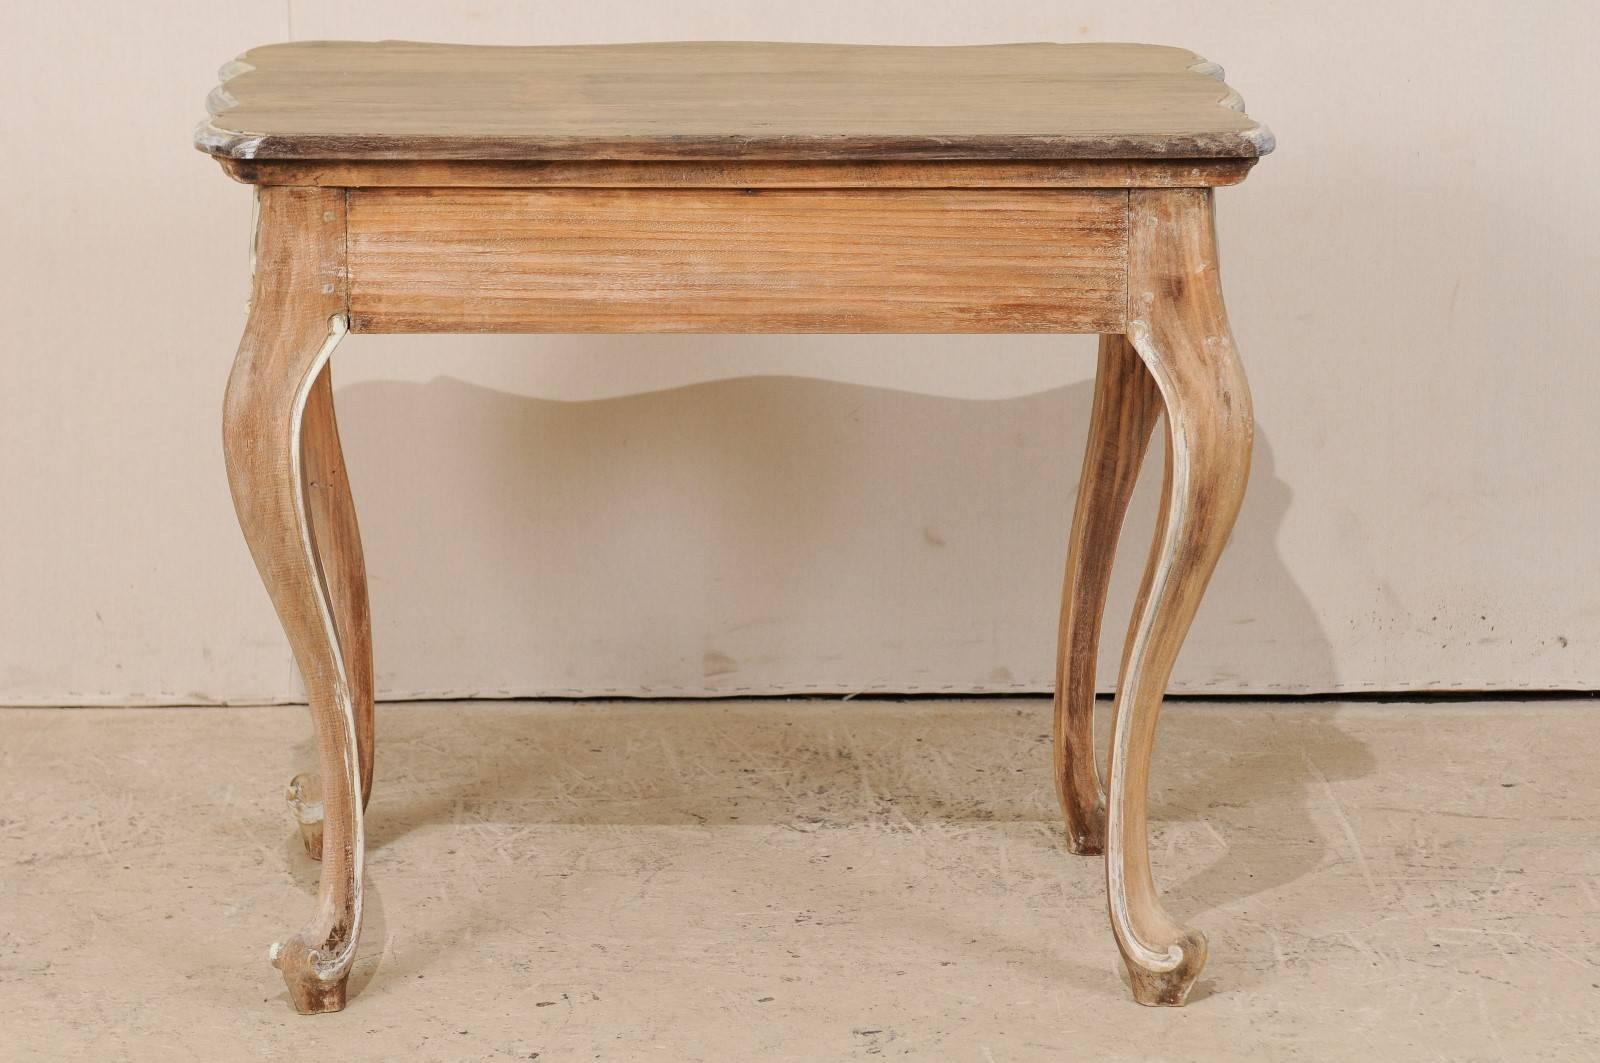 Lovely Brazilian Accent Table of Natural Wood with Painted Trim & Cabriole Legs 3